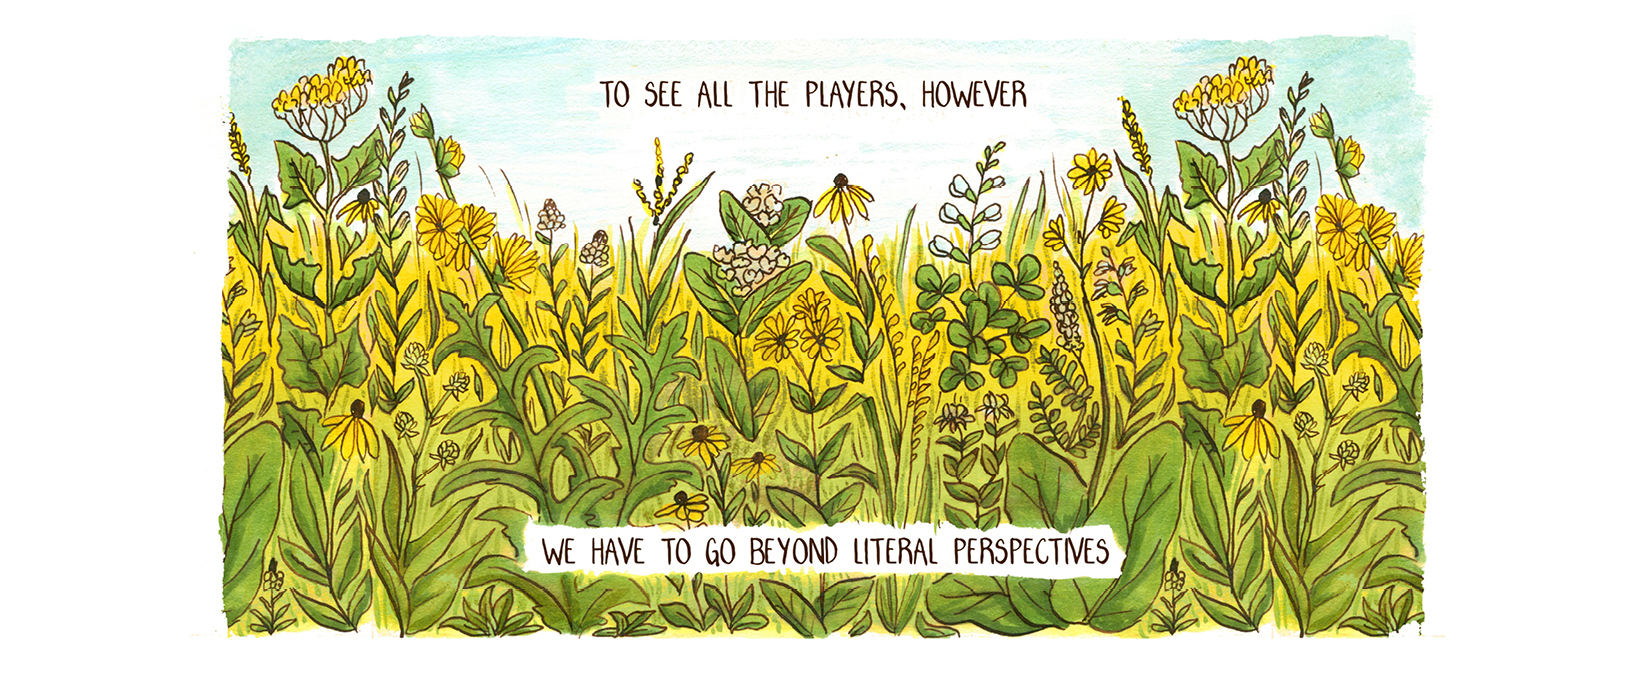 an exploded view of a prairie, where every single species is clearly, individually depicted instead of obscured by the plants around it. Around 25 species are depicted.